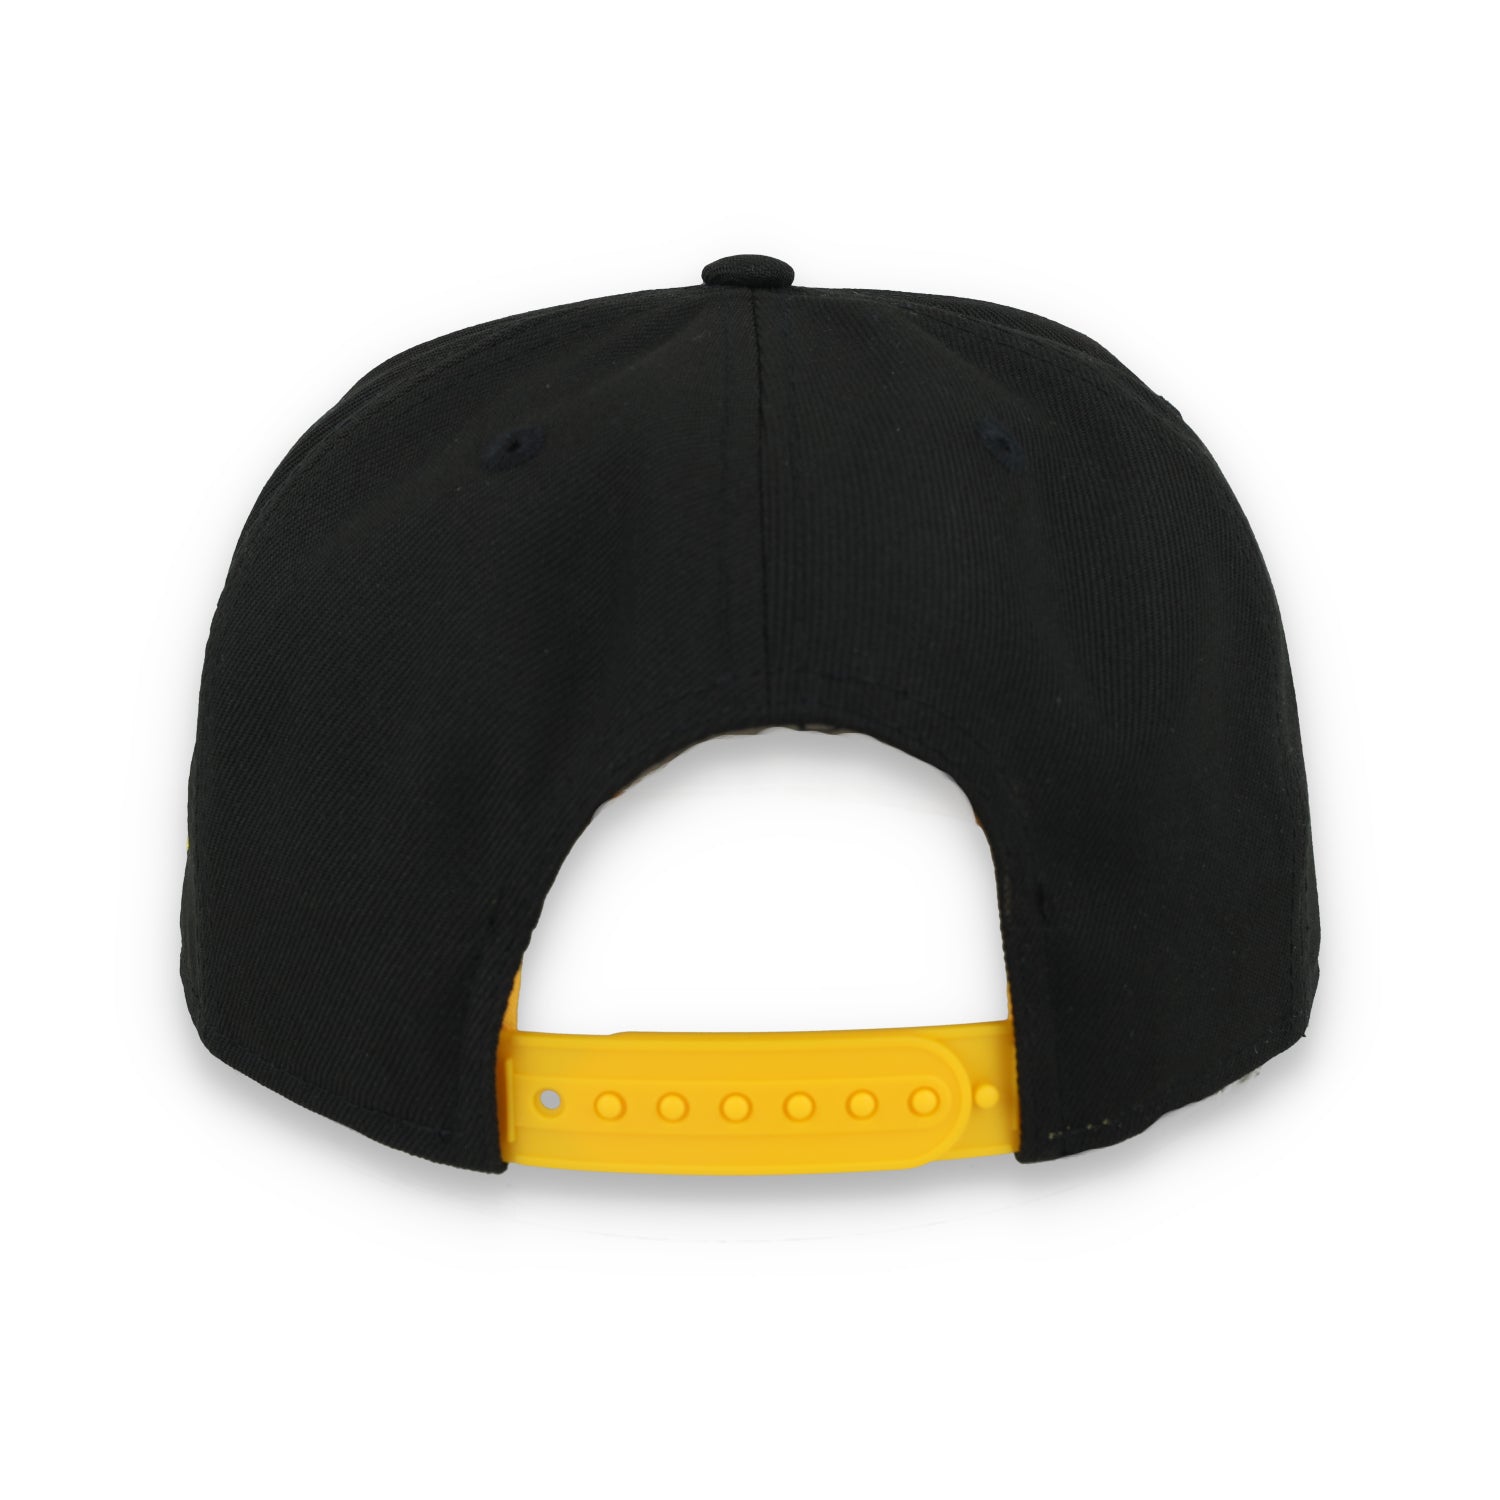 New Era Pittsburgh Pirates Game Day 9FIFTY Snapback Hat